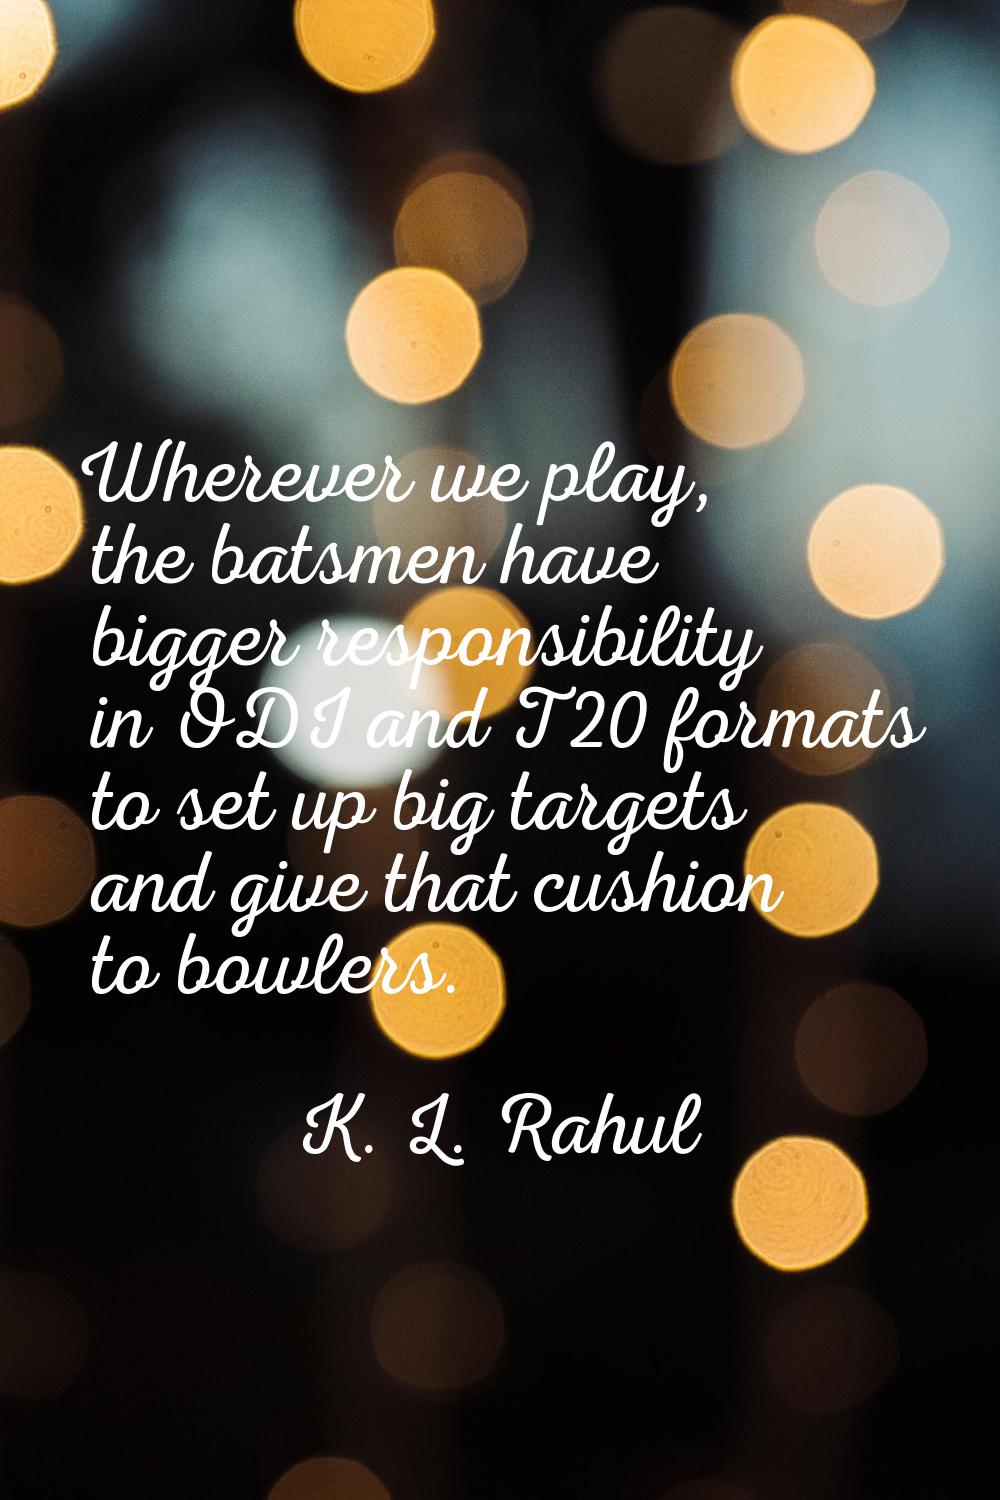 Wherever we play, the batsmen have bigger responsibility in ODI and T20 formats to set up big targe